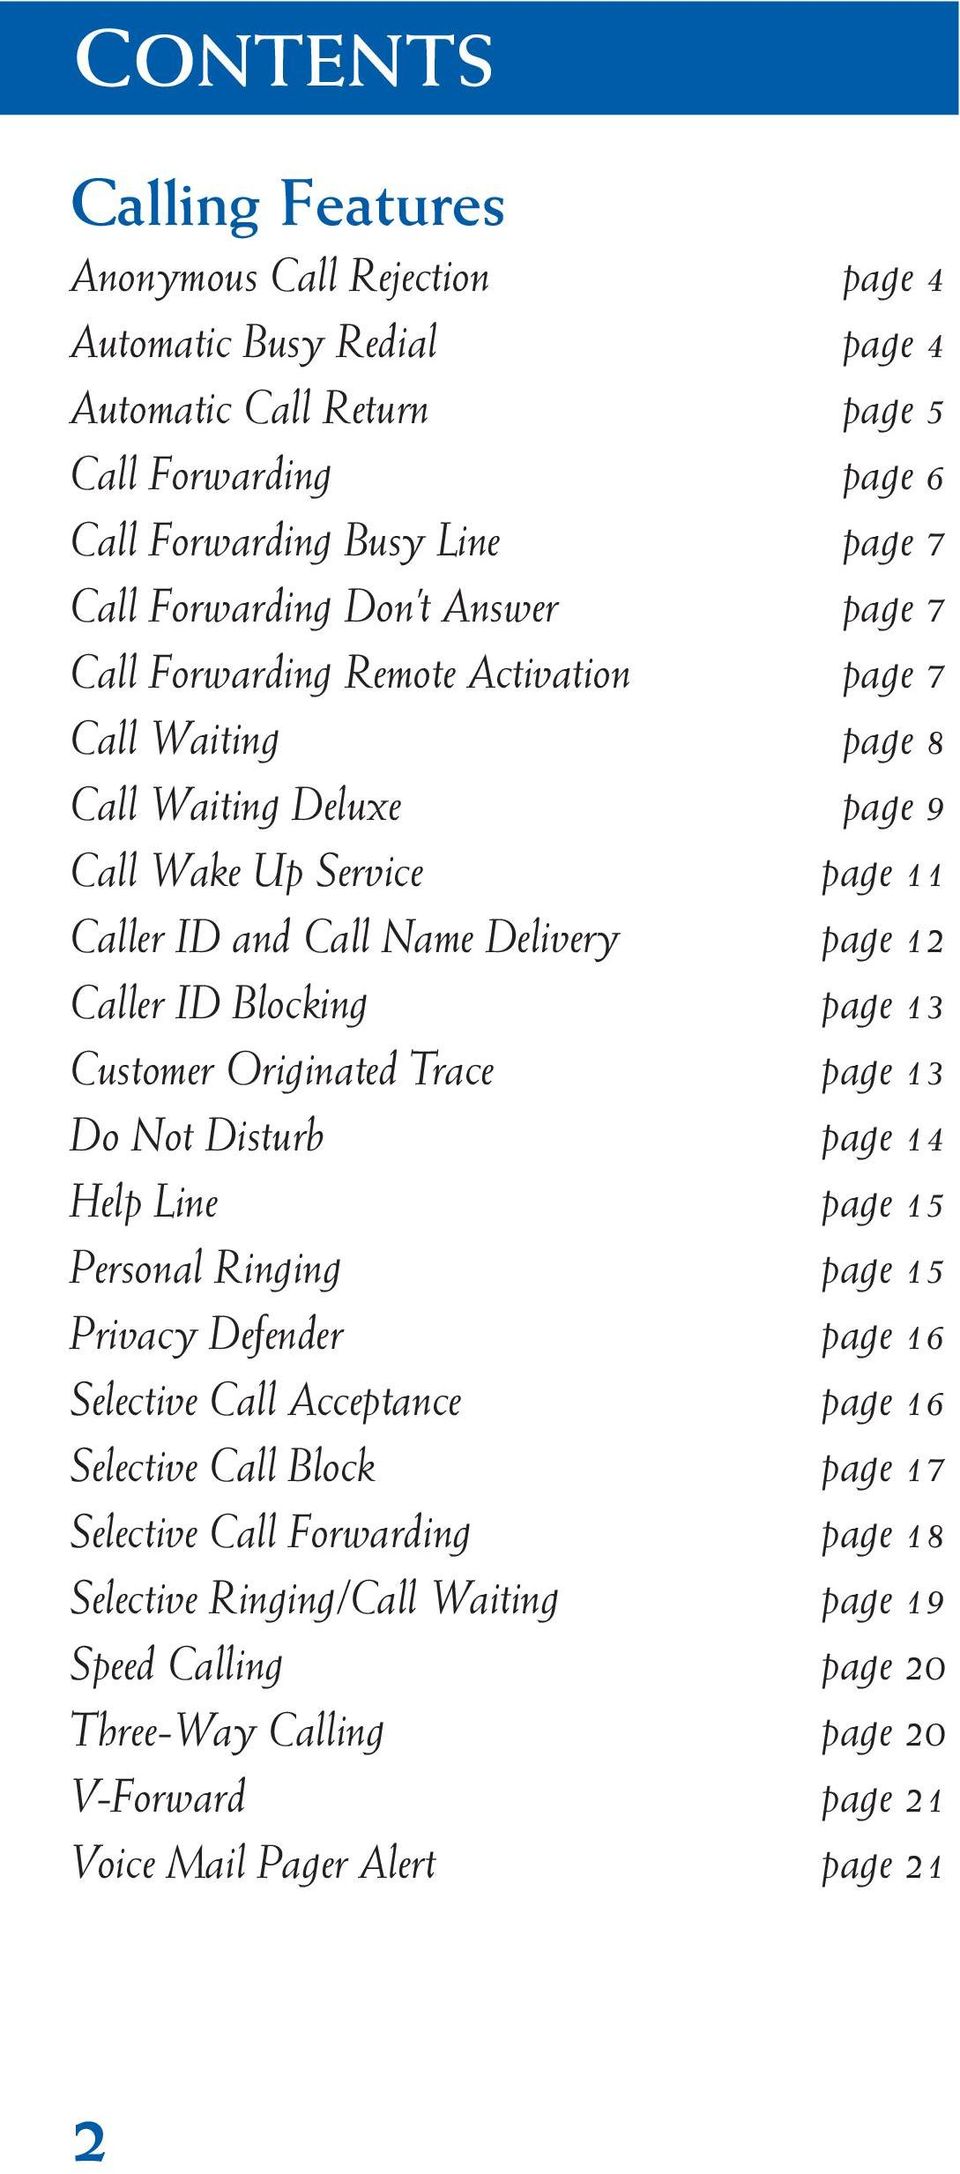 Blocking page 13 Customer Originated Trace page 13 Do Not Disturb page 14 Help Line page 15 Personal Ringing page 15 Privacy Defender page 16 Selective Call Acceptance page 16 Selective